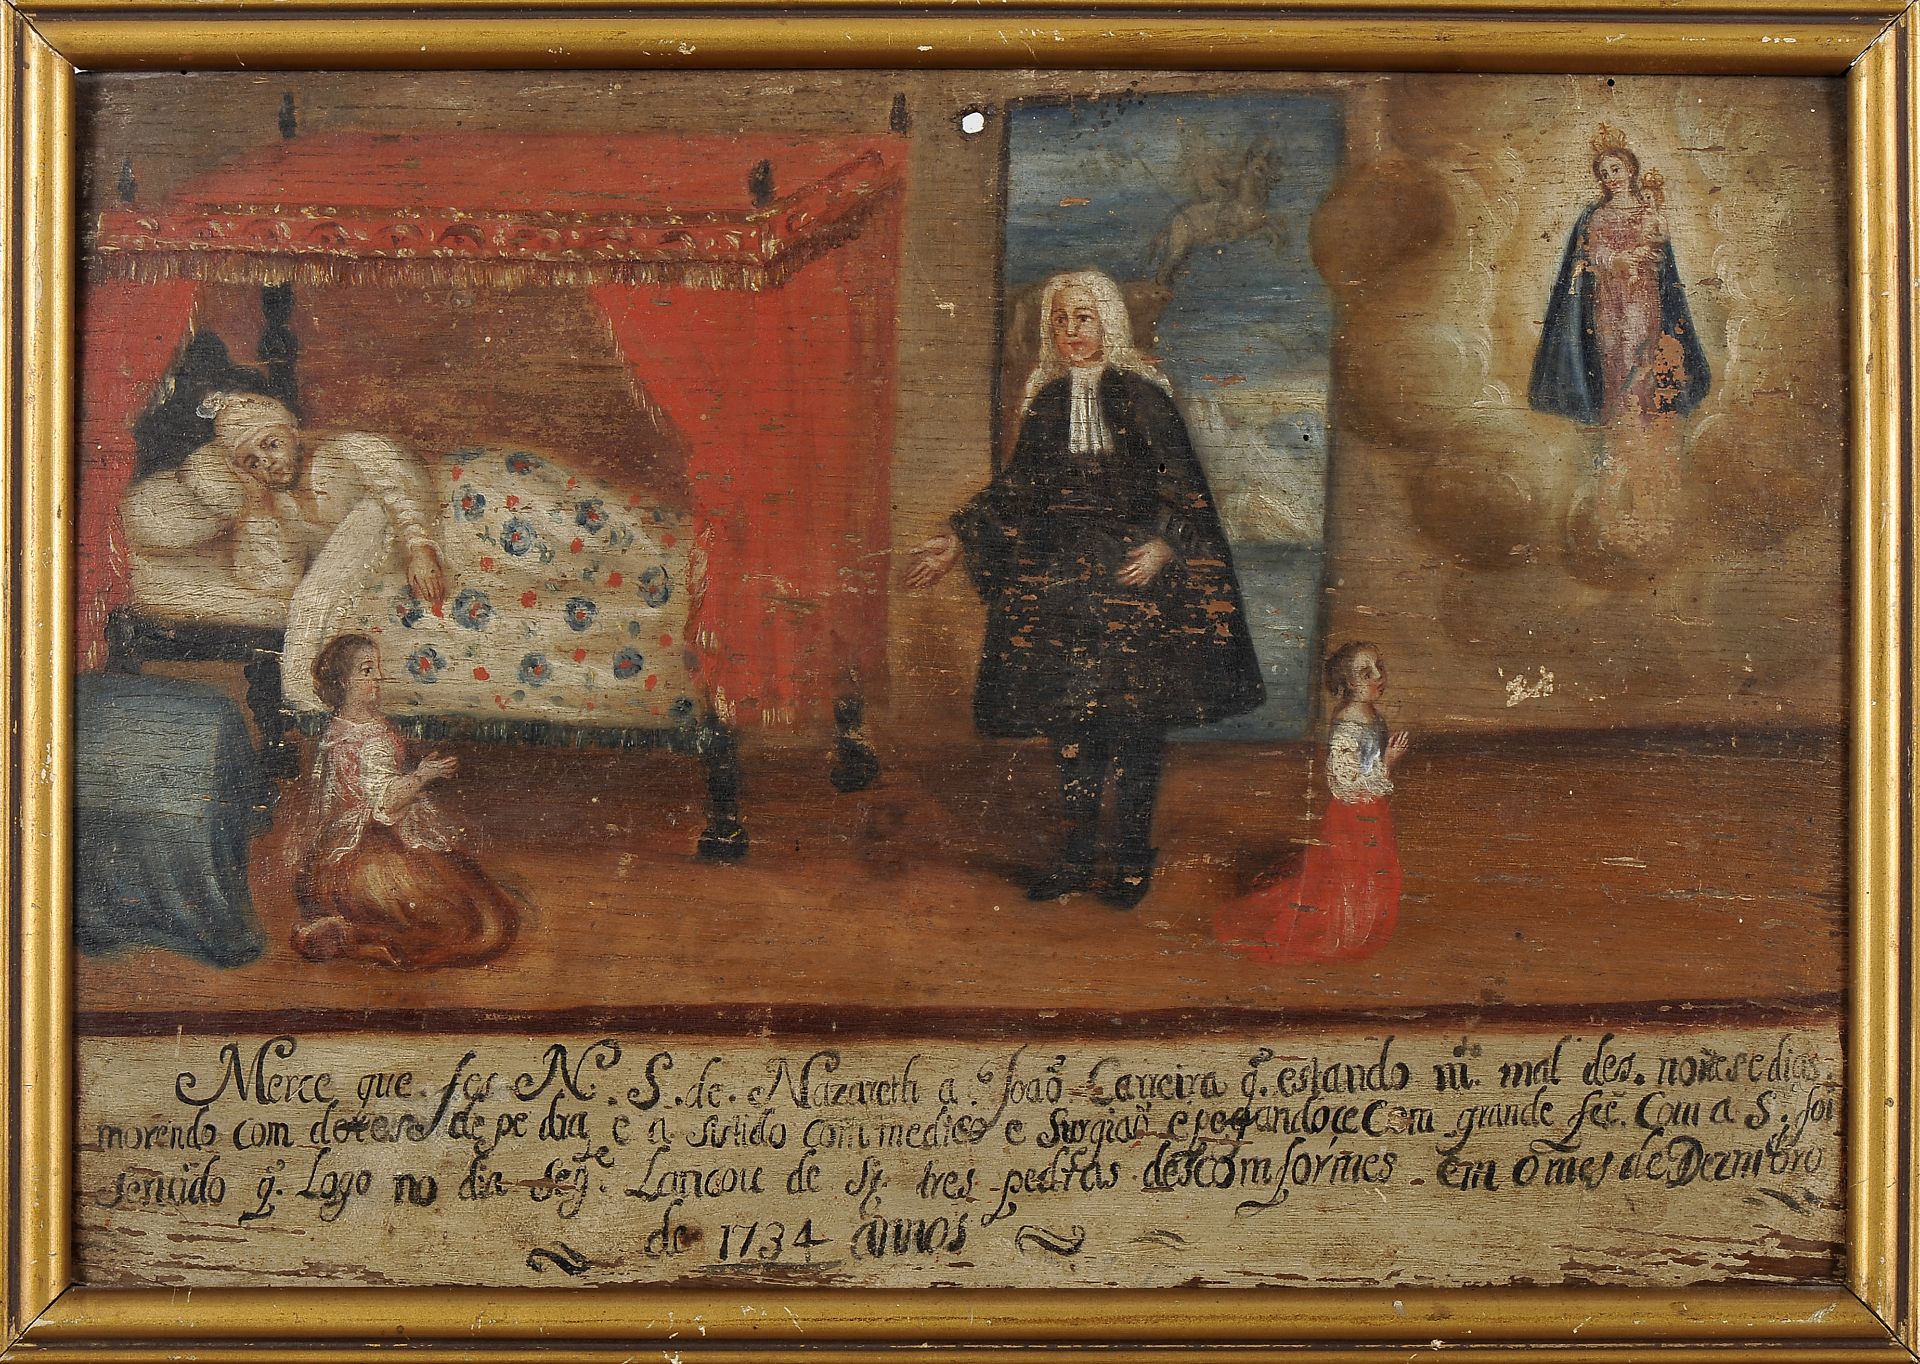 Ex-voto - Grace granted by Our Lady of Nazareth to João Carreira in 1734